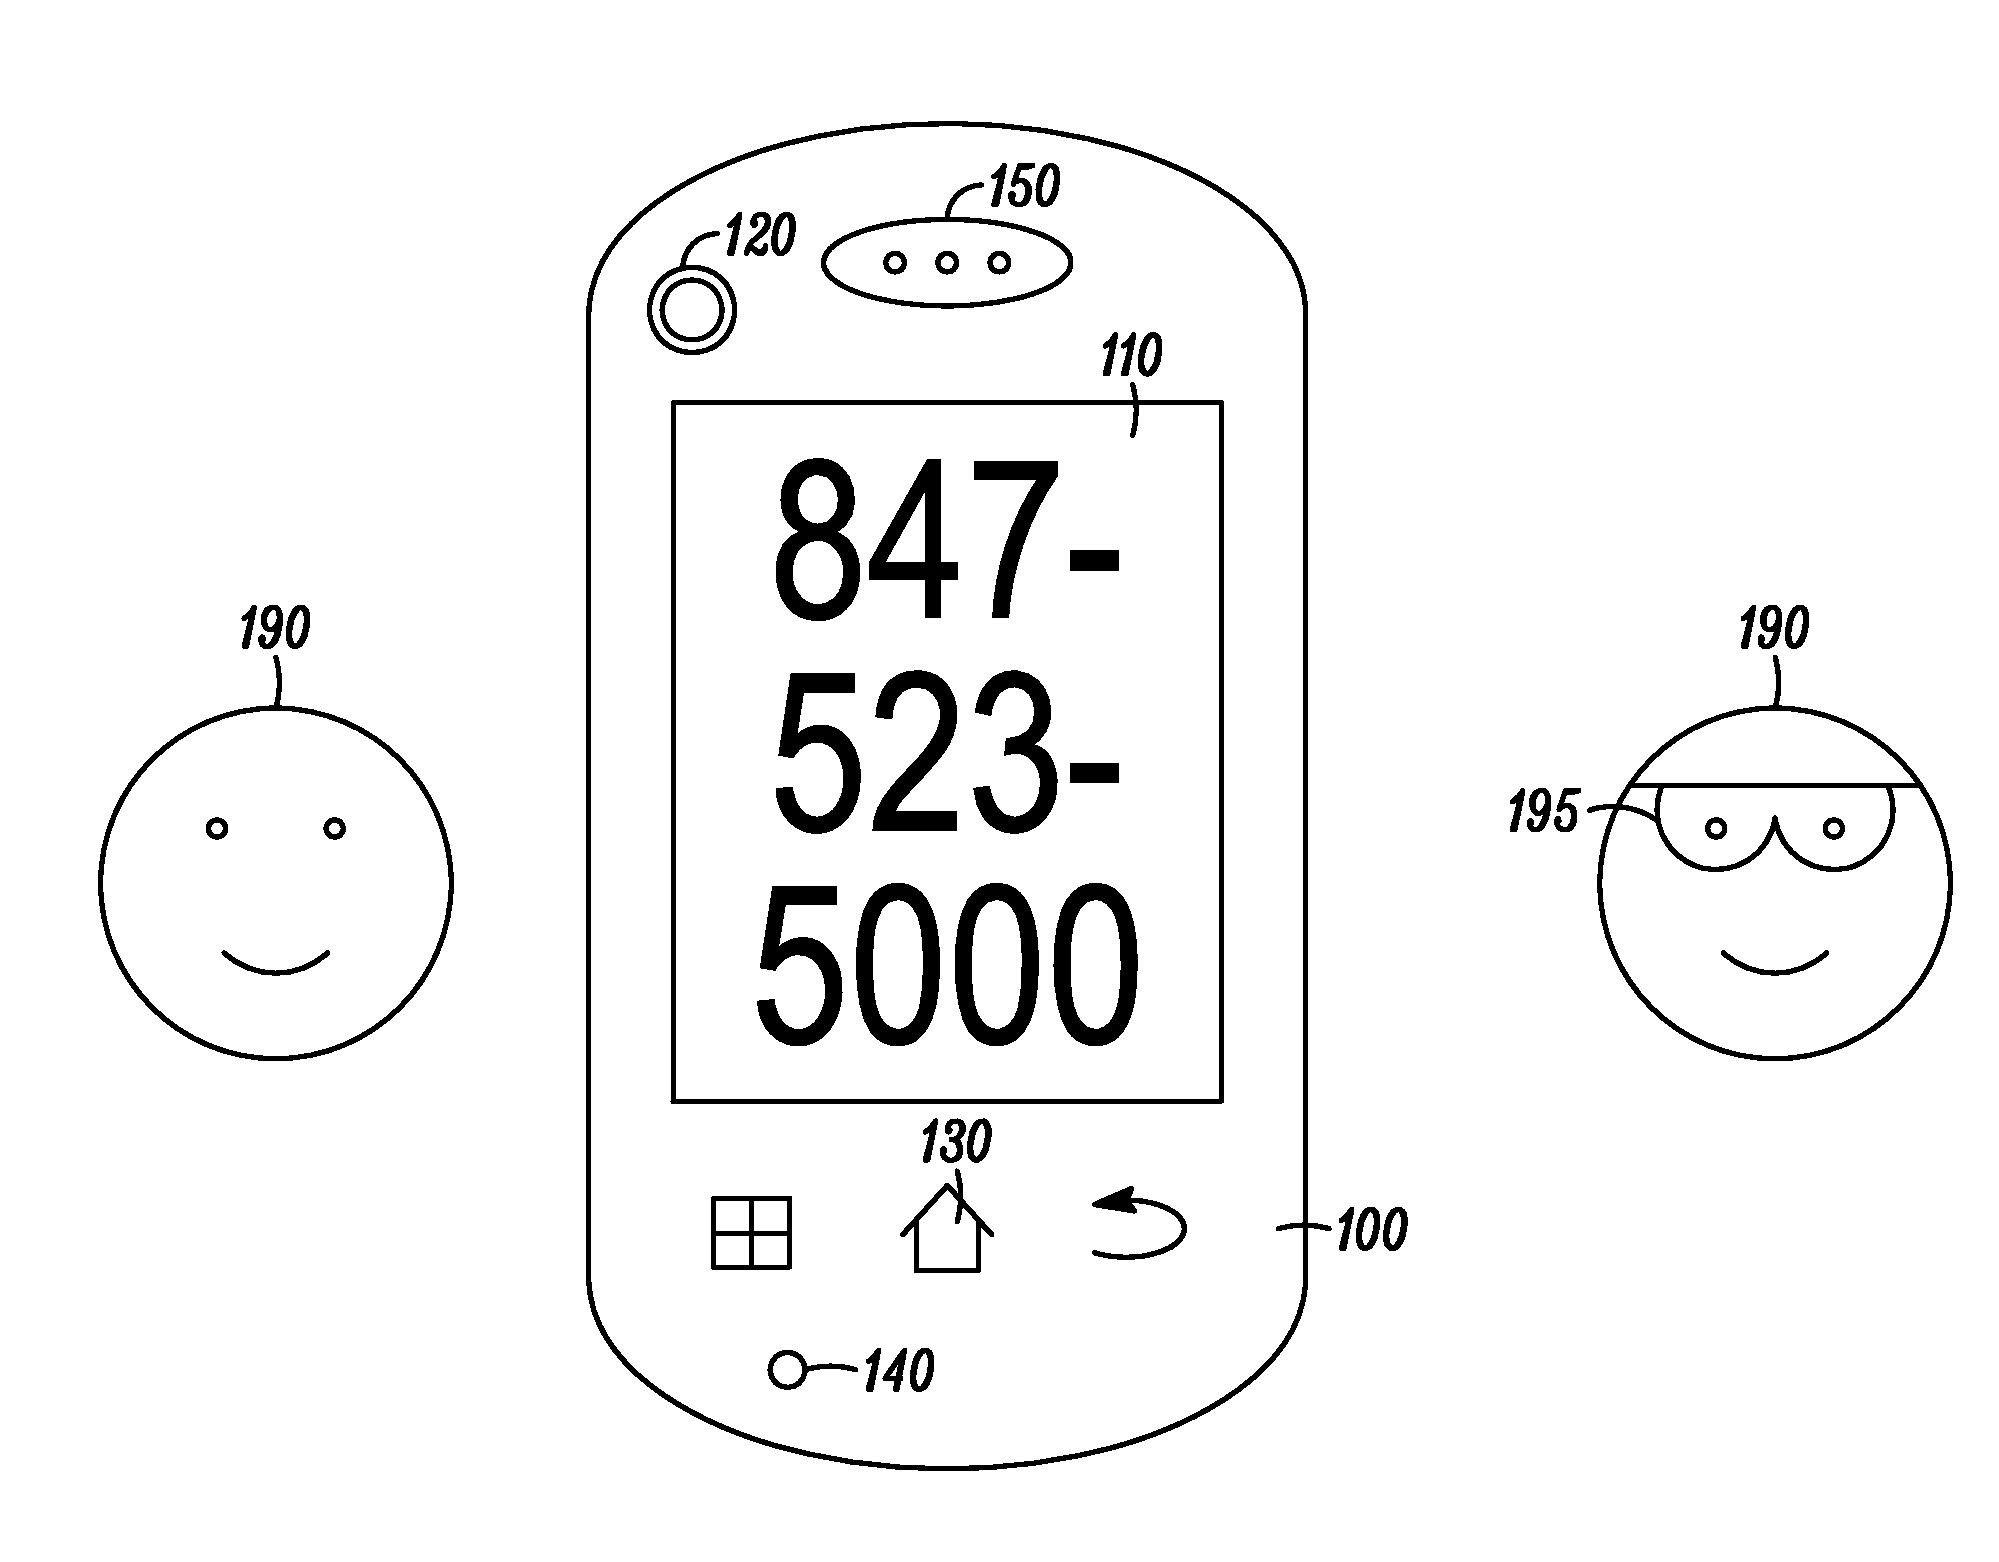 Method and Device for Visual Compensation